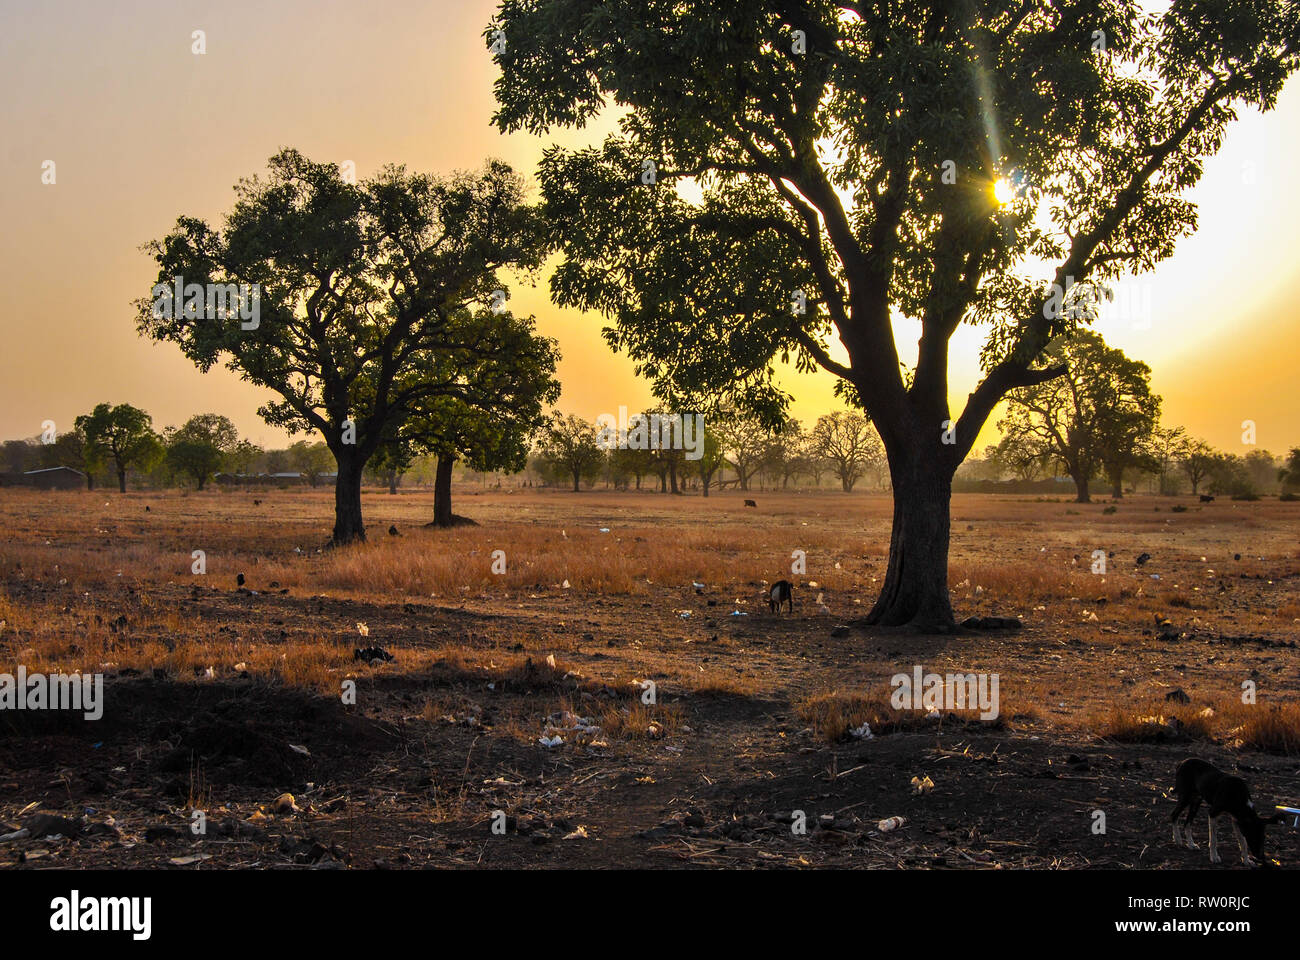 A scenic landscape photo of a idyllic sunset between the trees in the beautiful Ghanaian savanna. Garbage/trash pollution the ground can be seen. Stock Photo